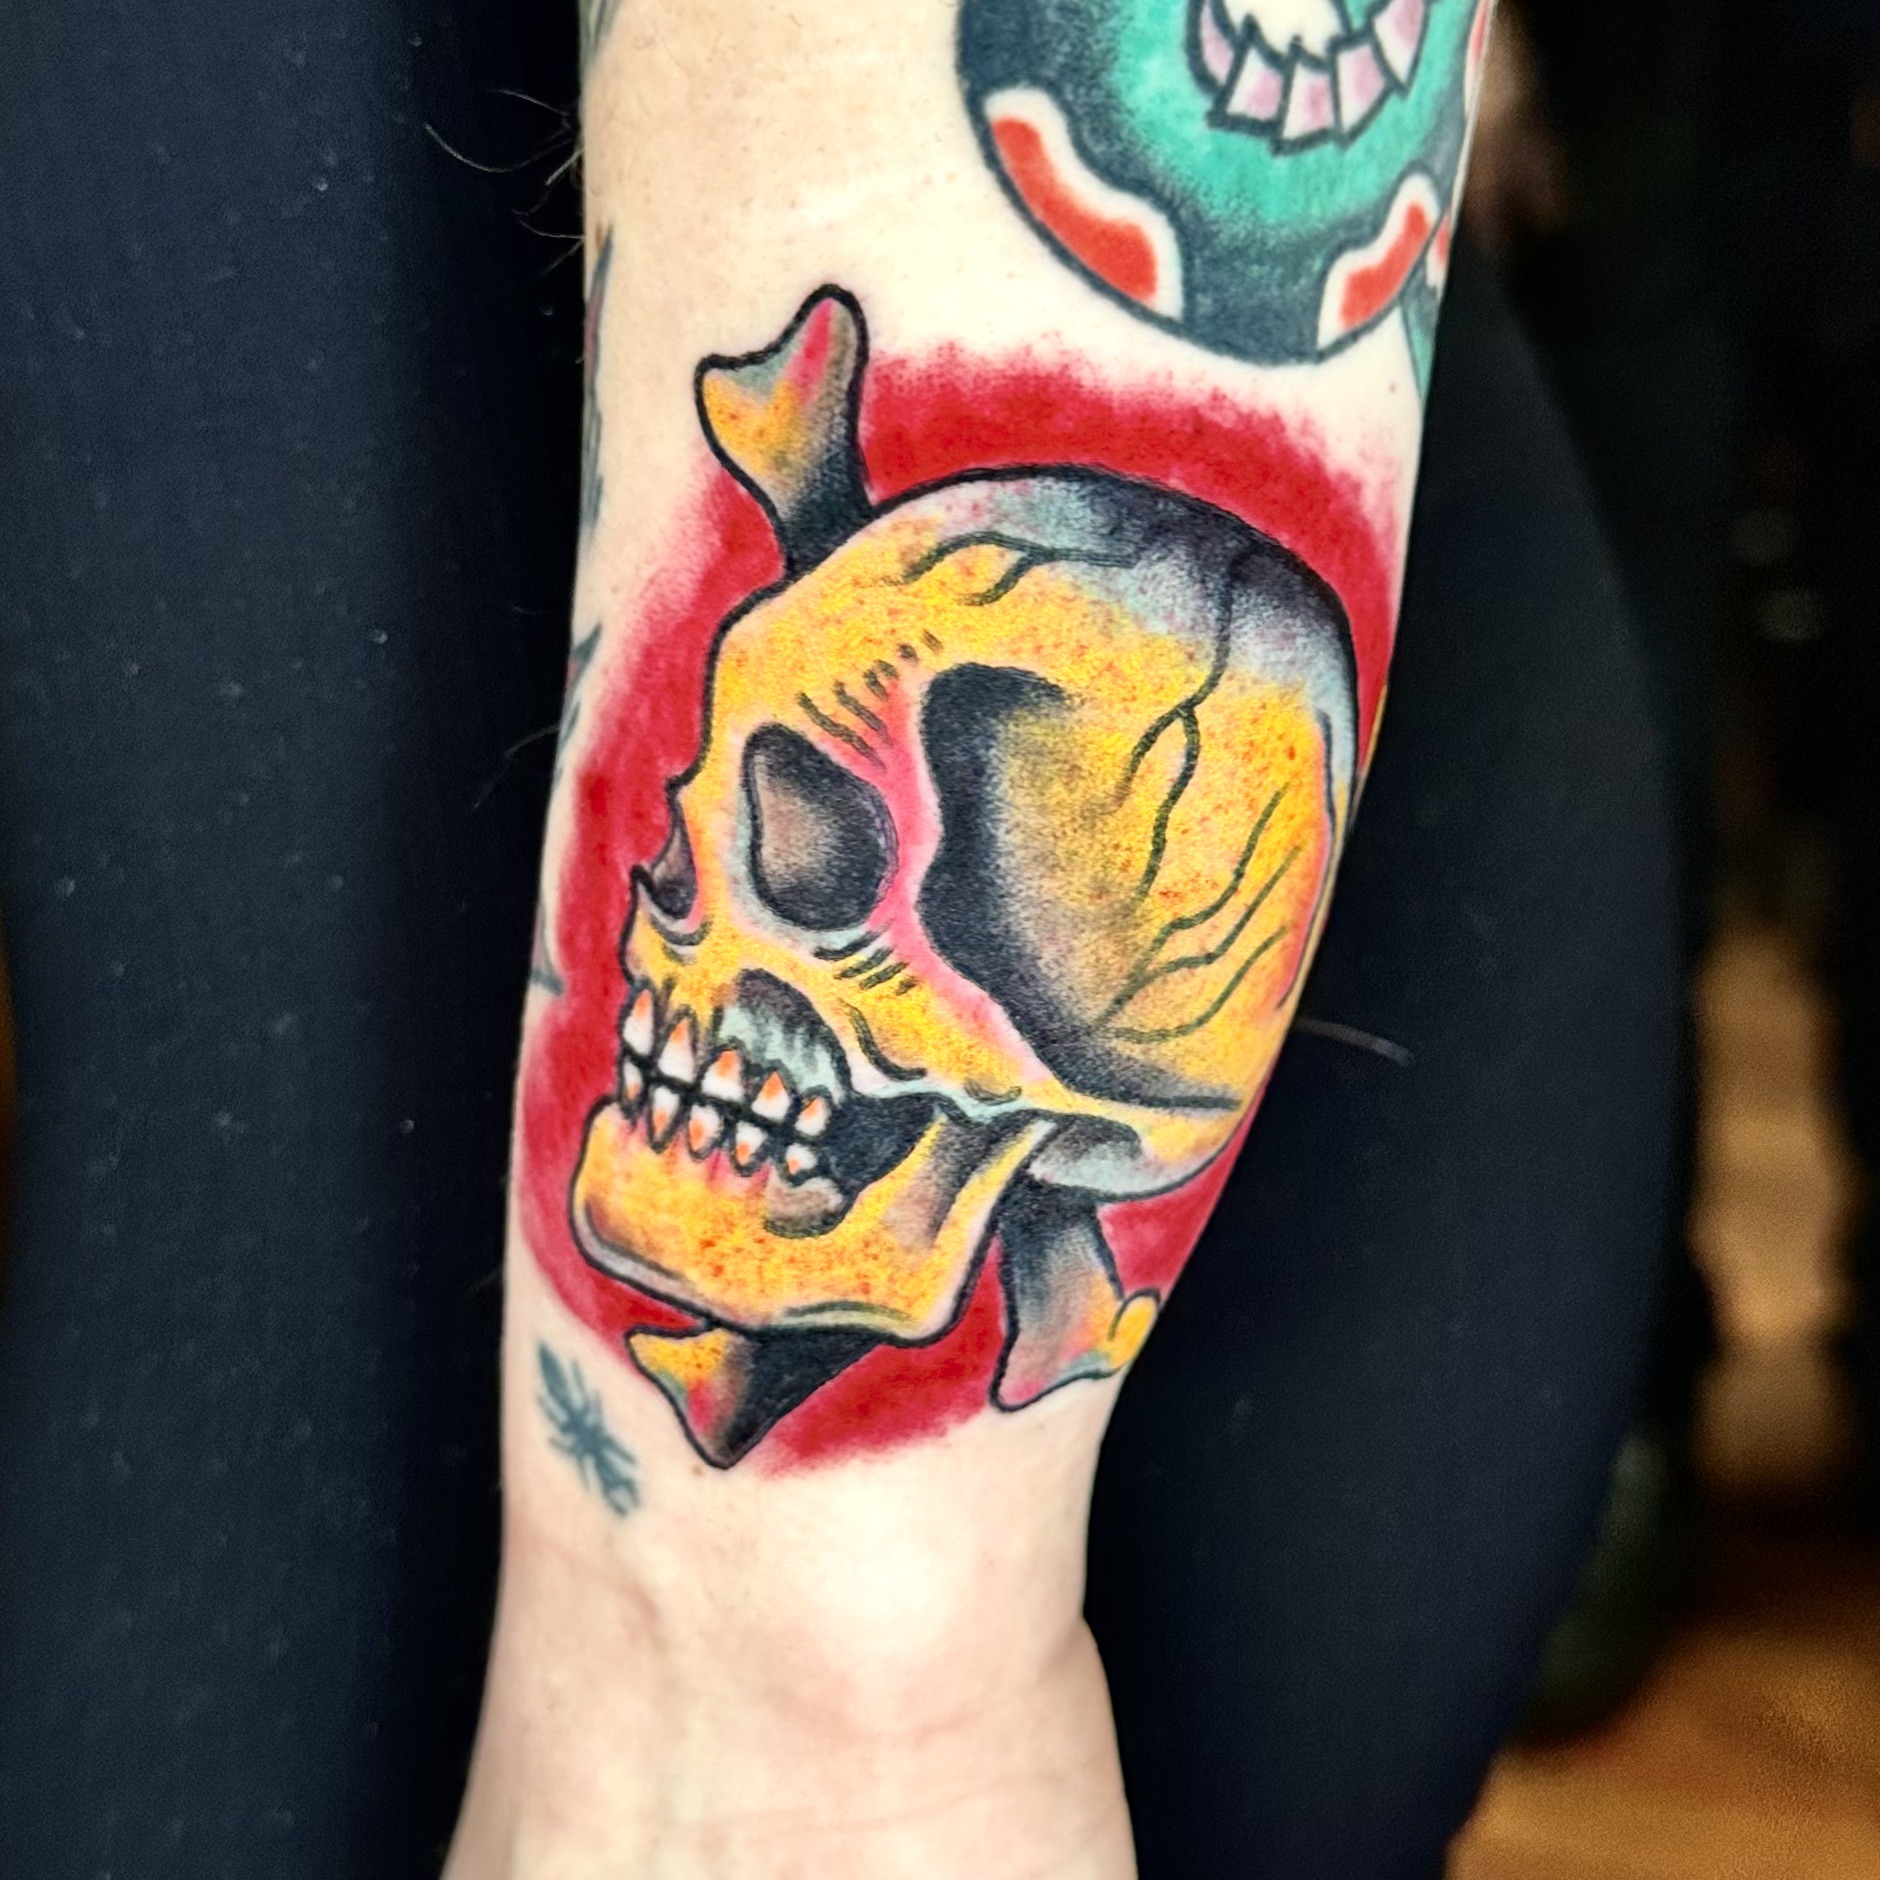 Tattoo of a skull and bones on an arm